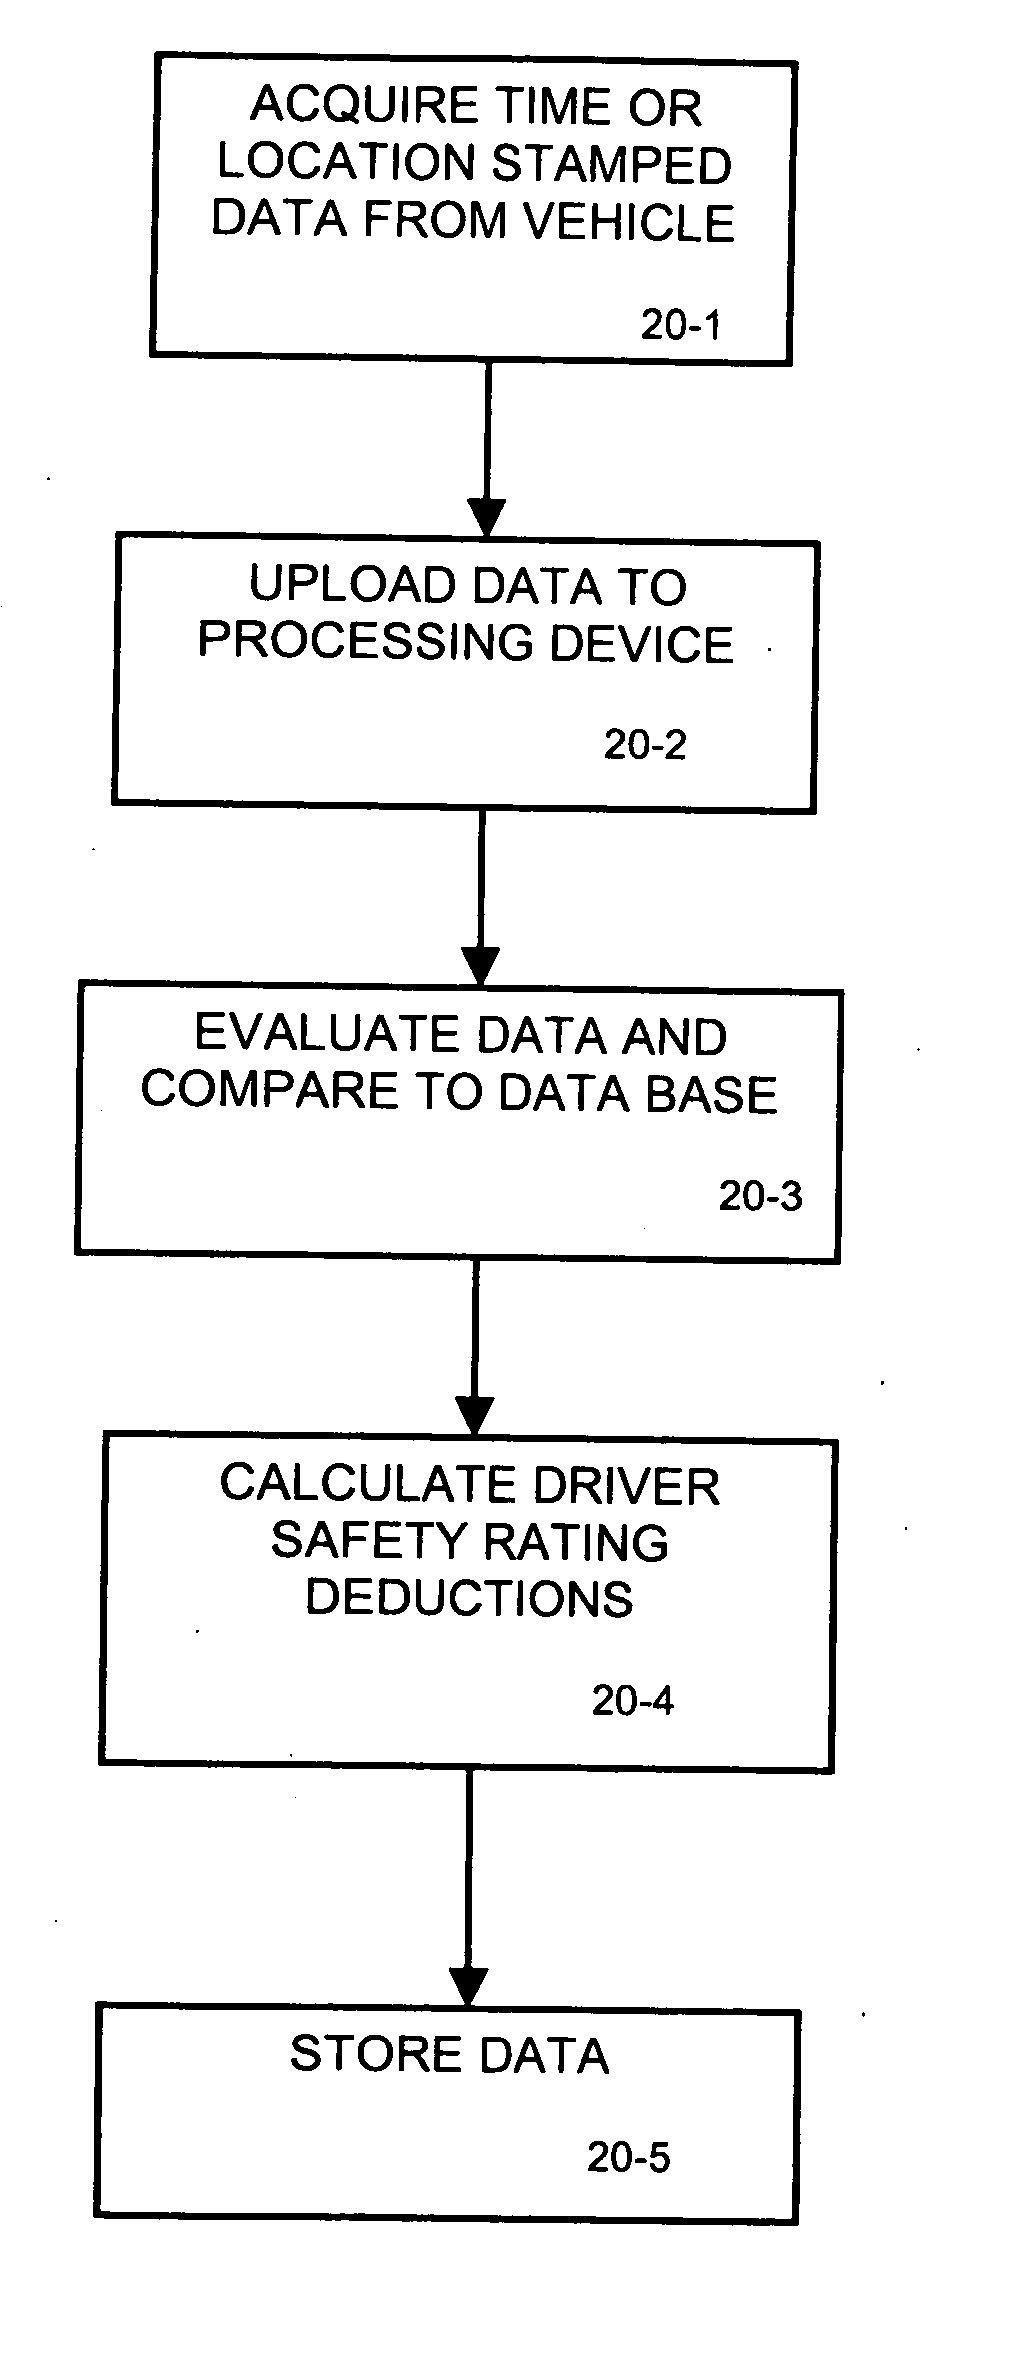 Motor vehicle operating data collection and analysis